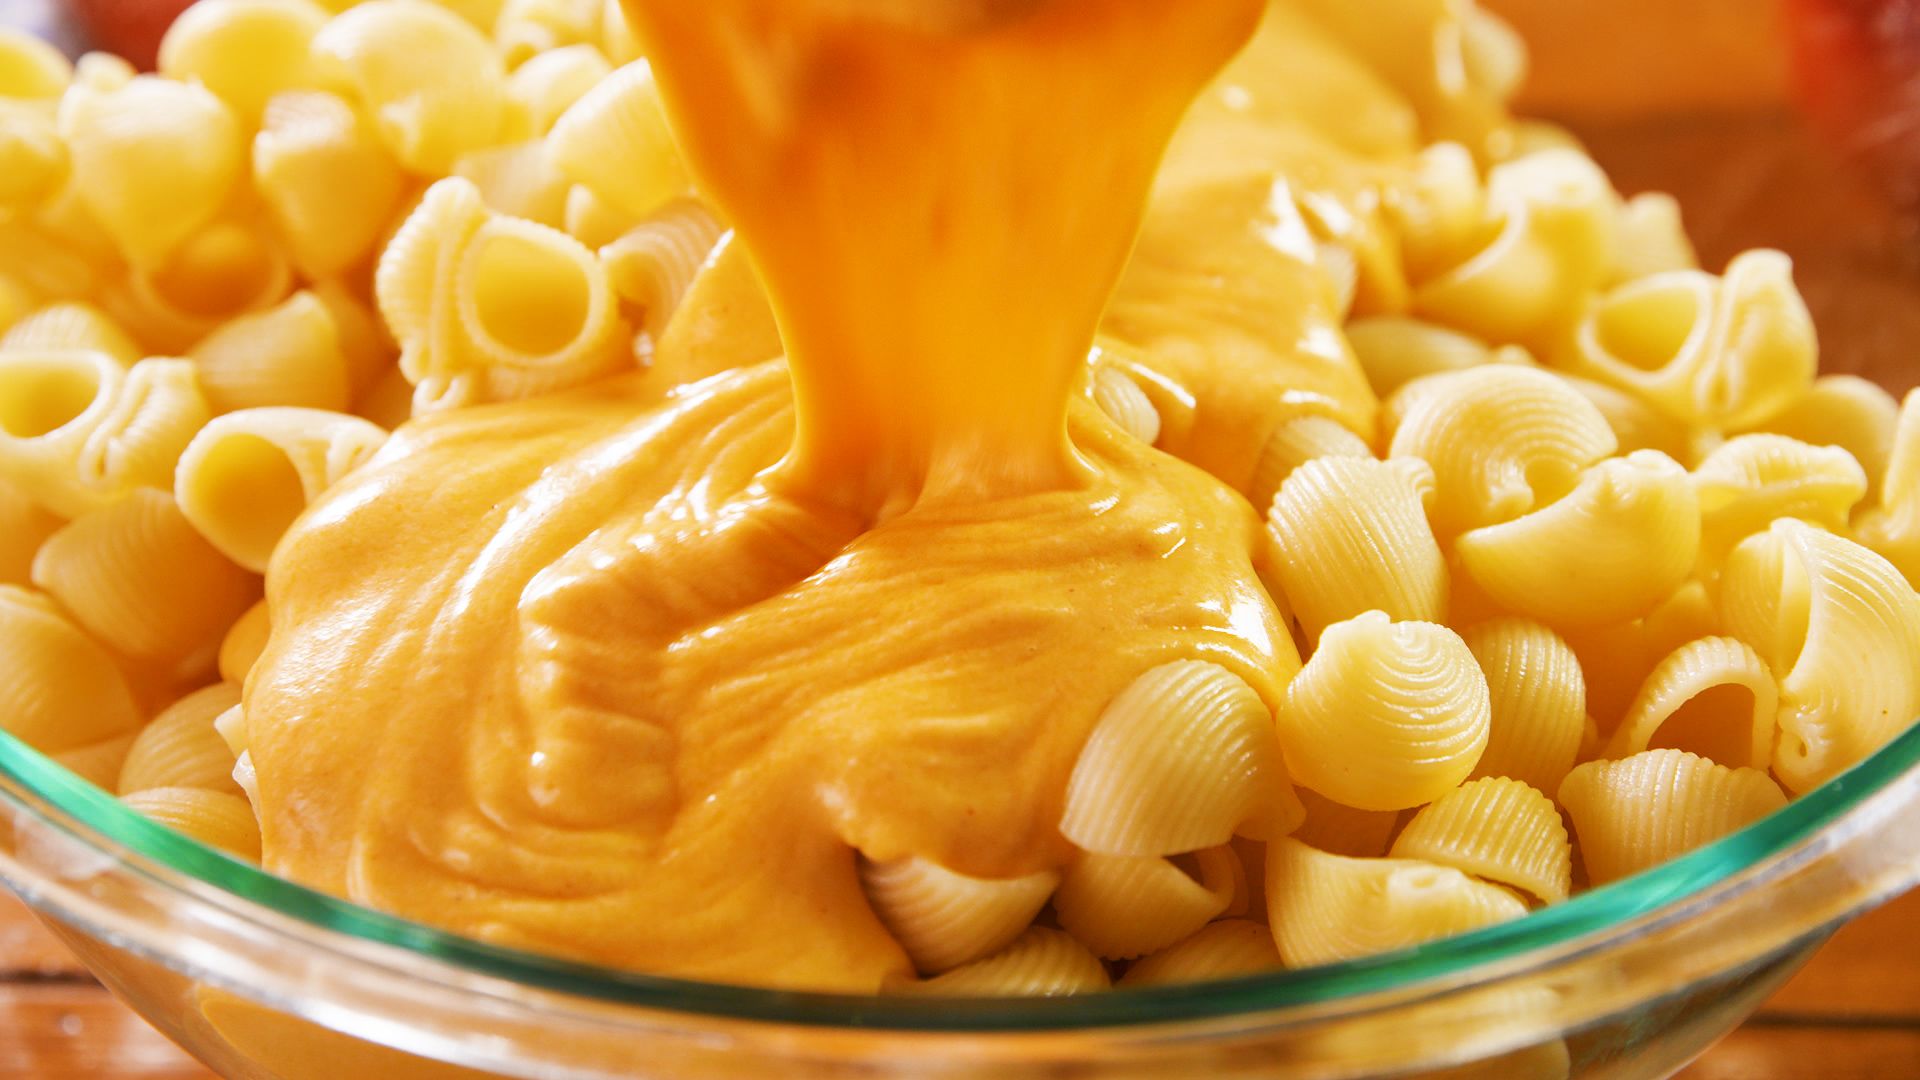 can i use nacho cheese for macaroni and cheese